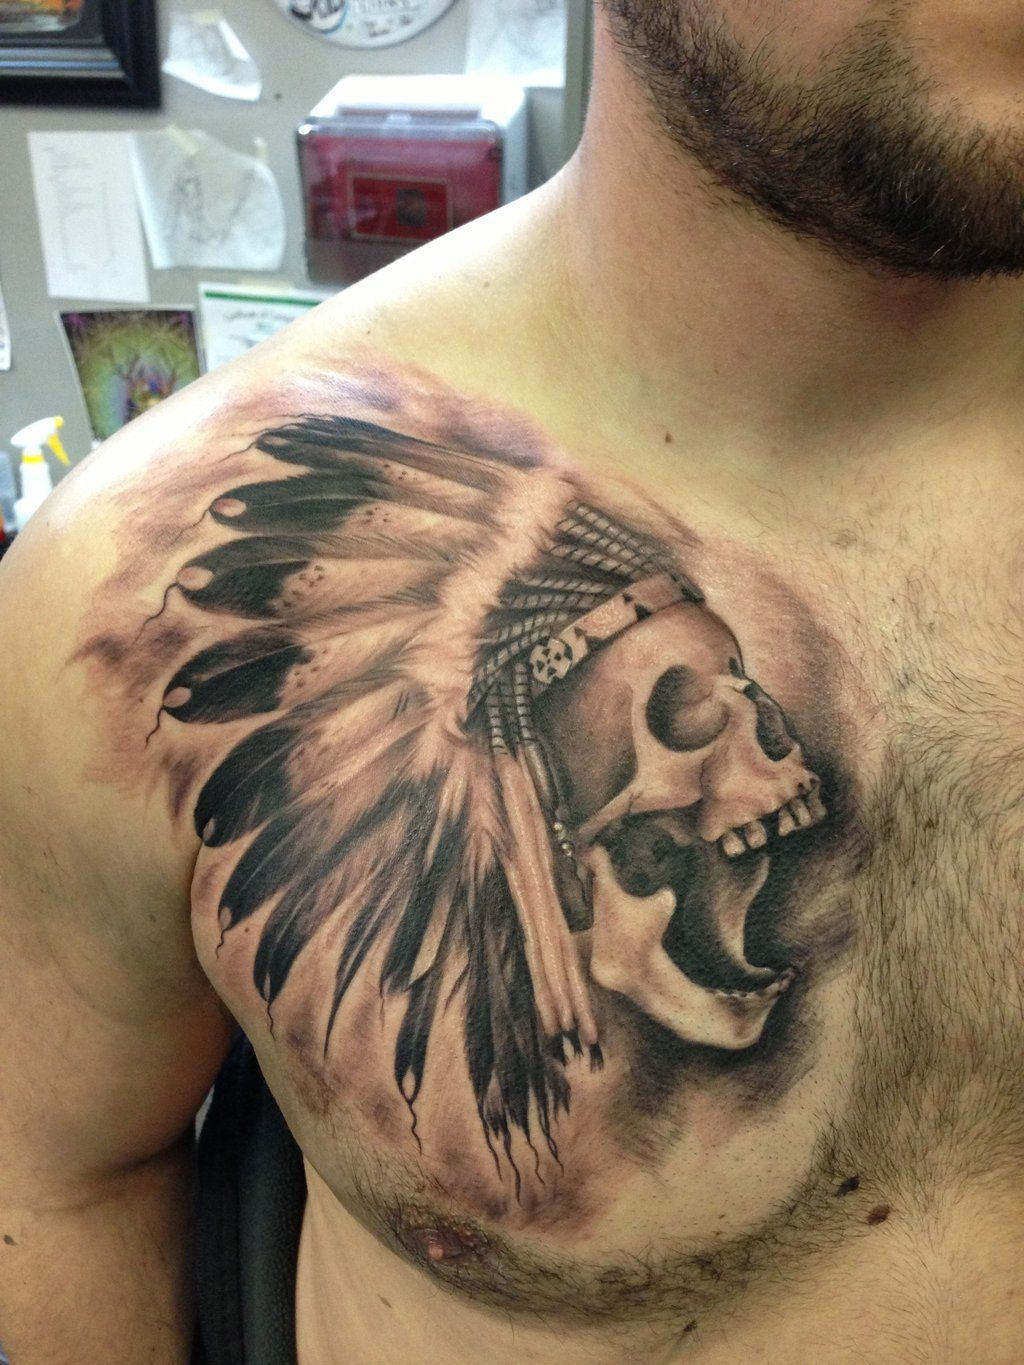 Black Shaded Indian Skull Tattoo On Upper Right Chest For Men in size 1024 X 1365